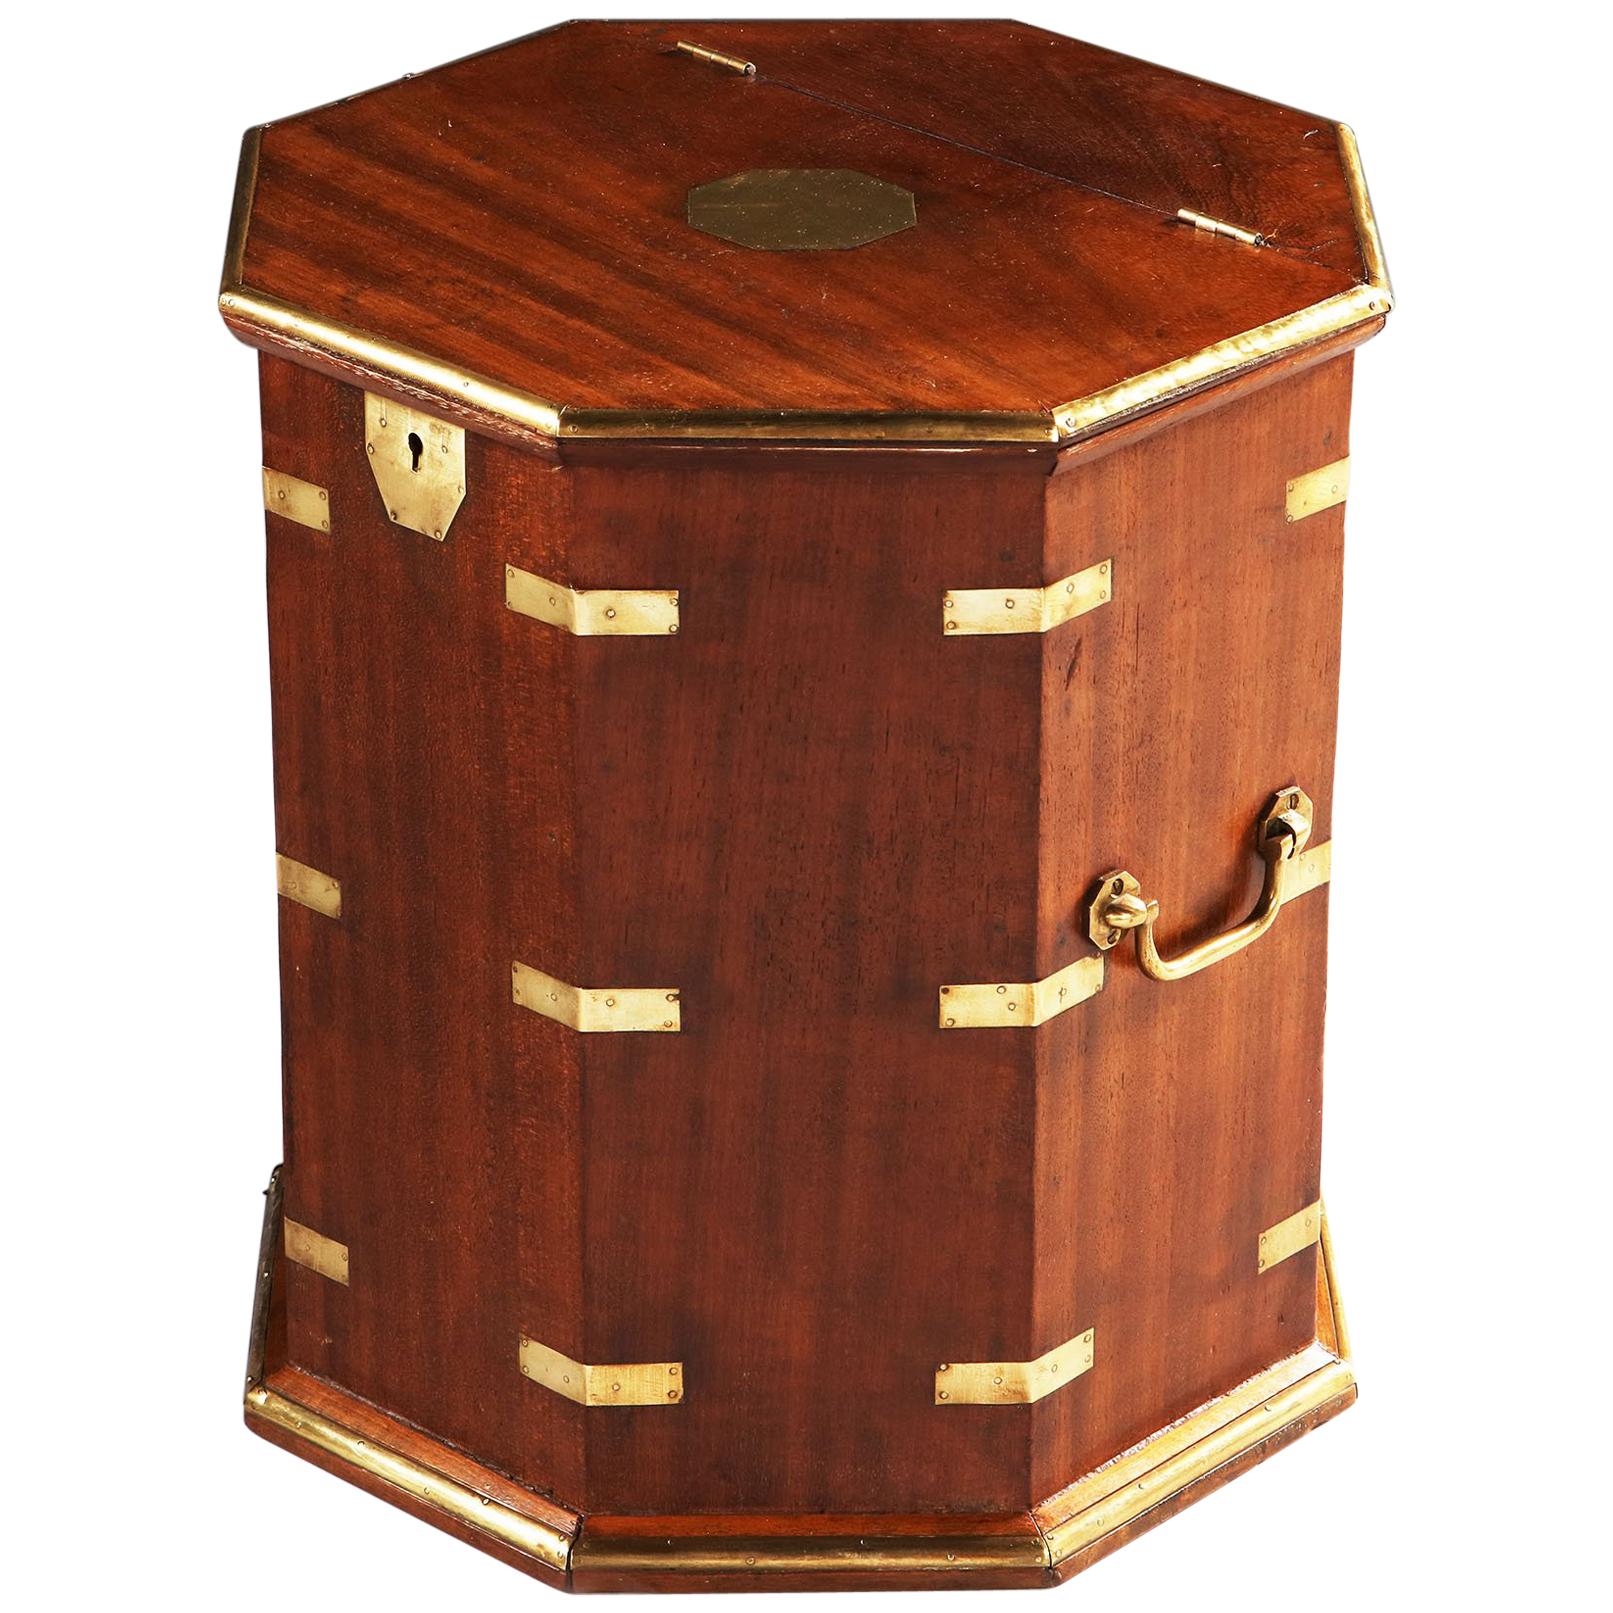 Hexagonal Mahogany and Brass Occasional Table or Campaign Box